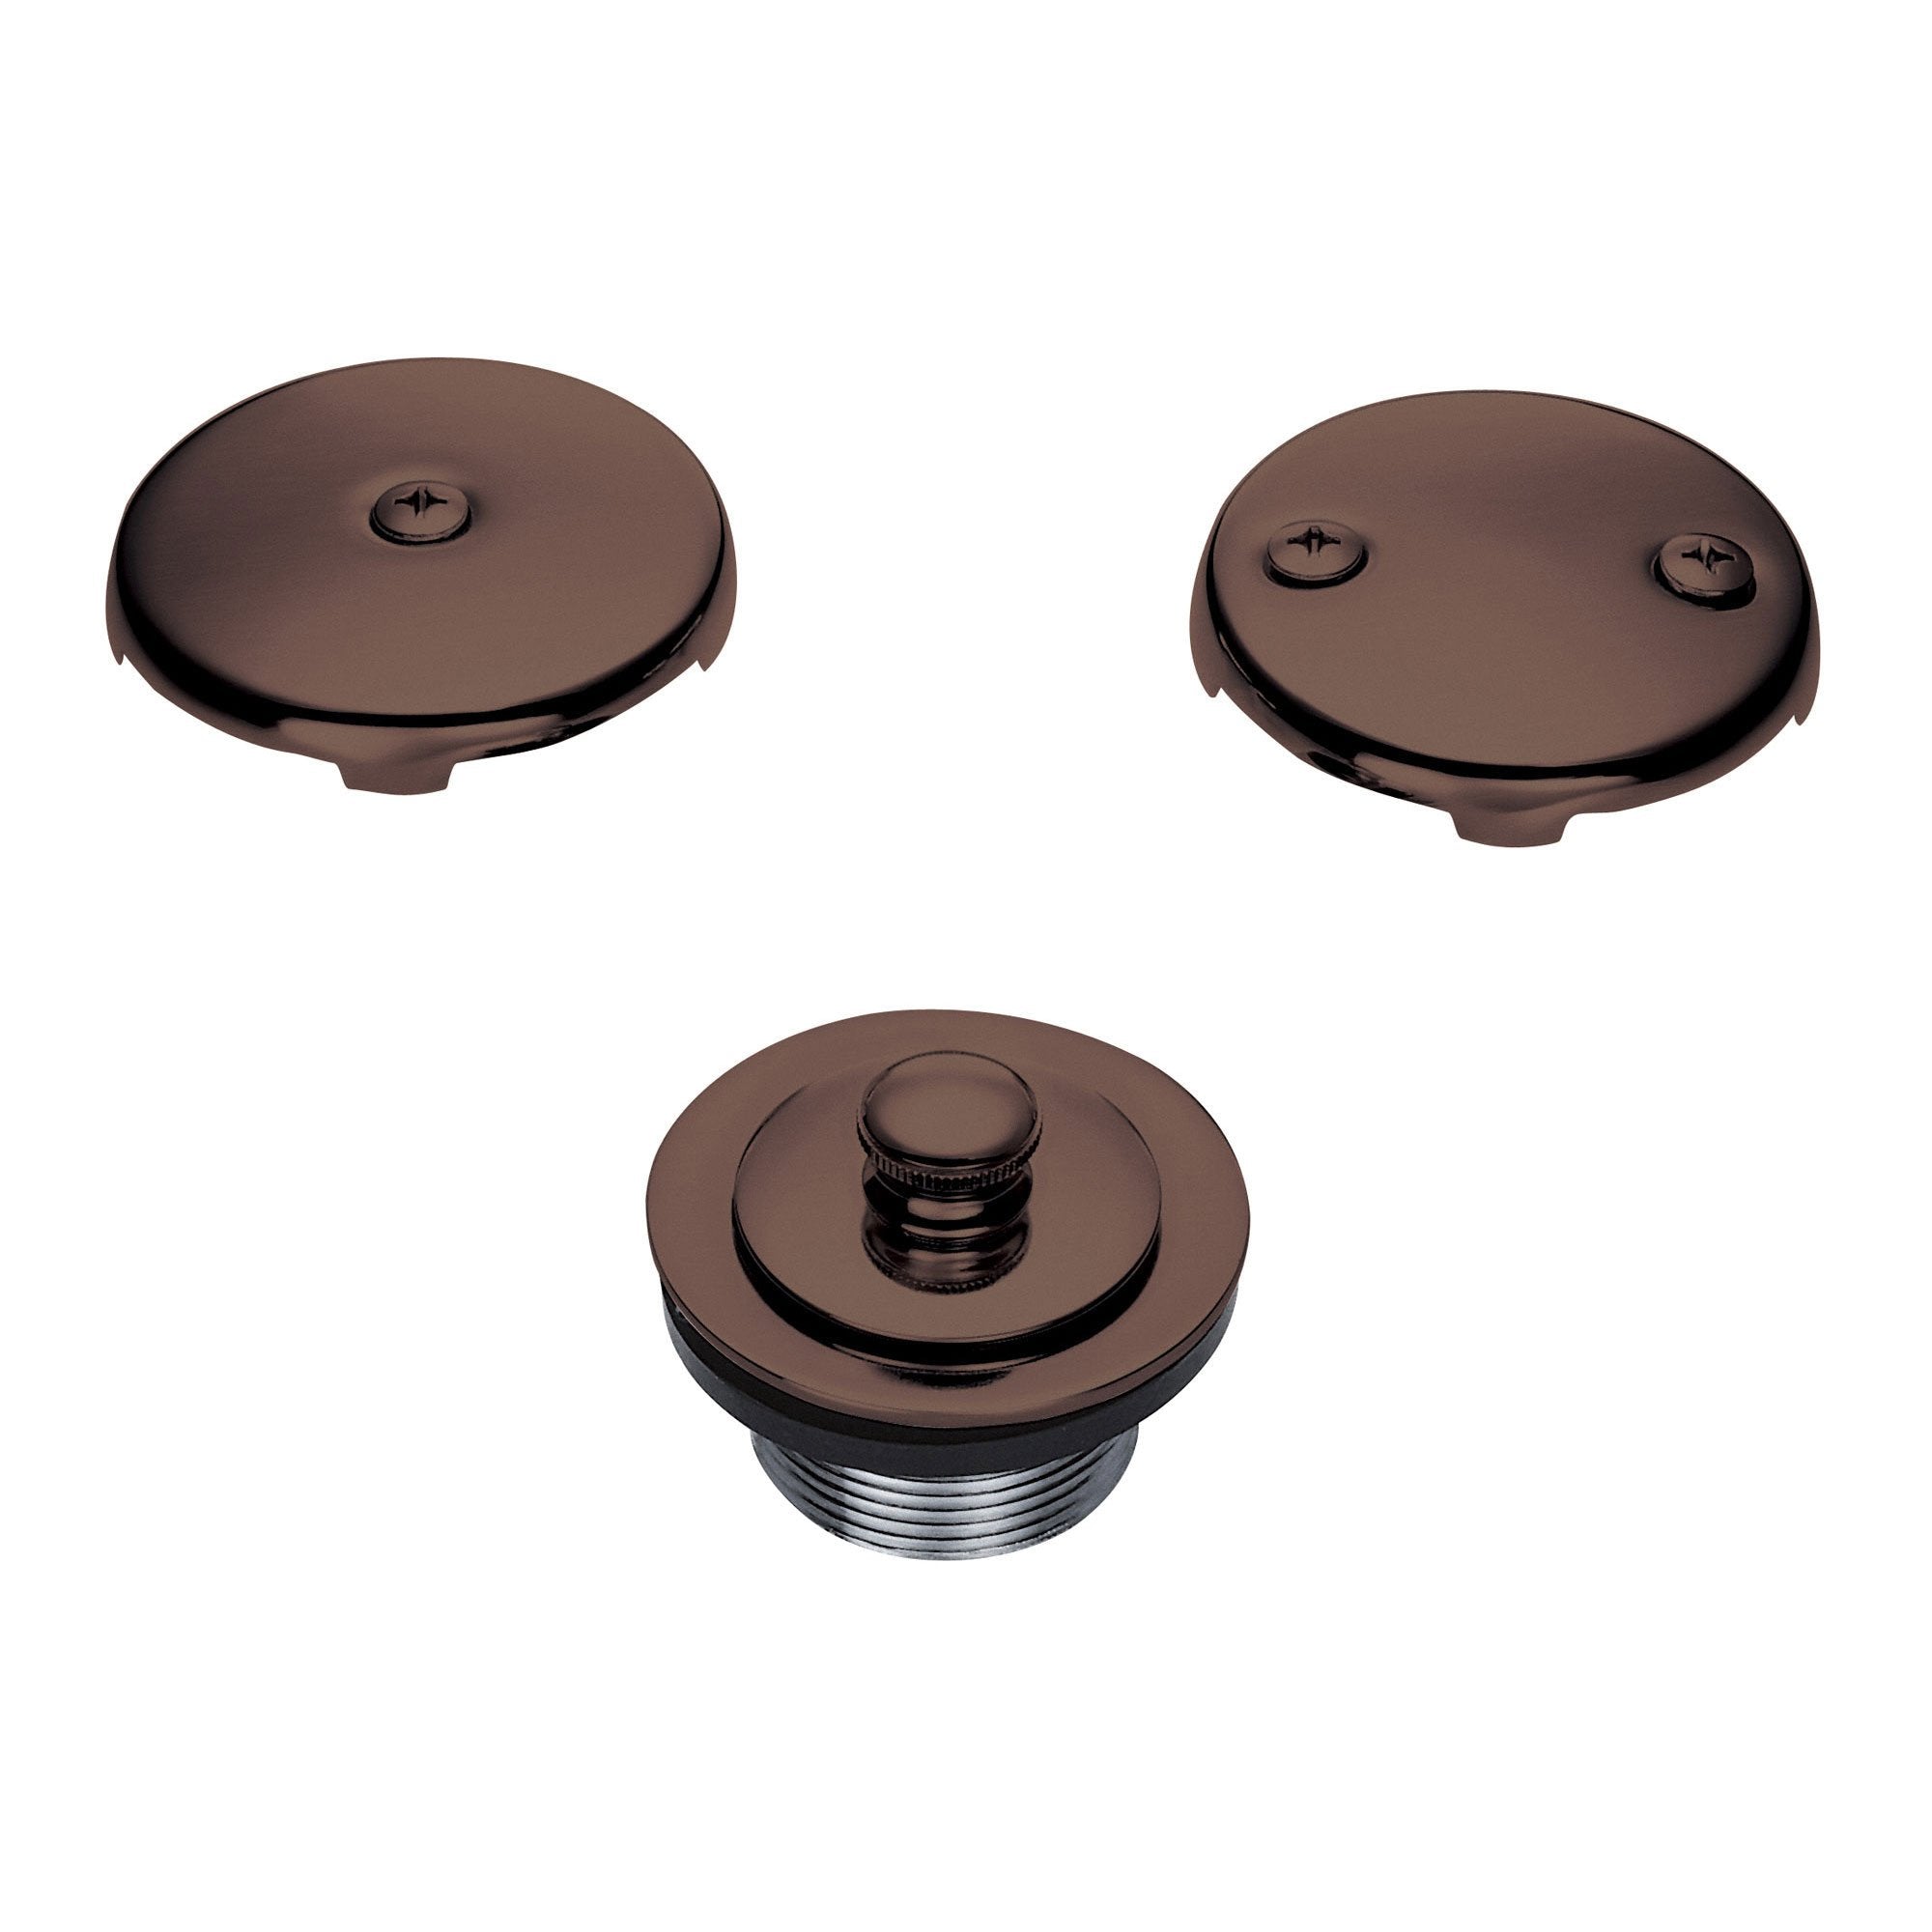 Danze Oil Rubbed Bronze Lift & Turn Bath Tub Drain and Overflow Cover Plate Kit